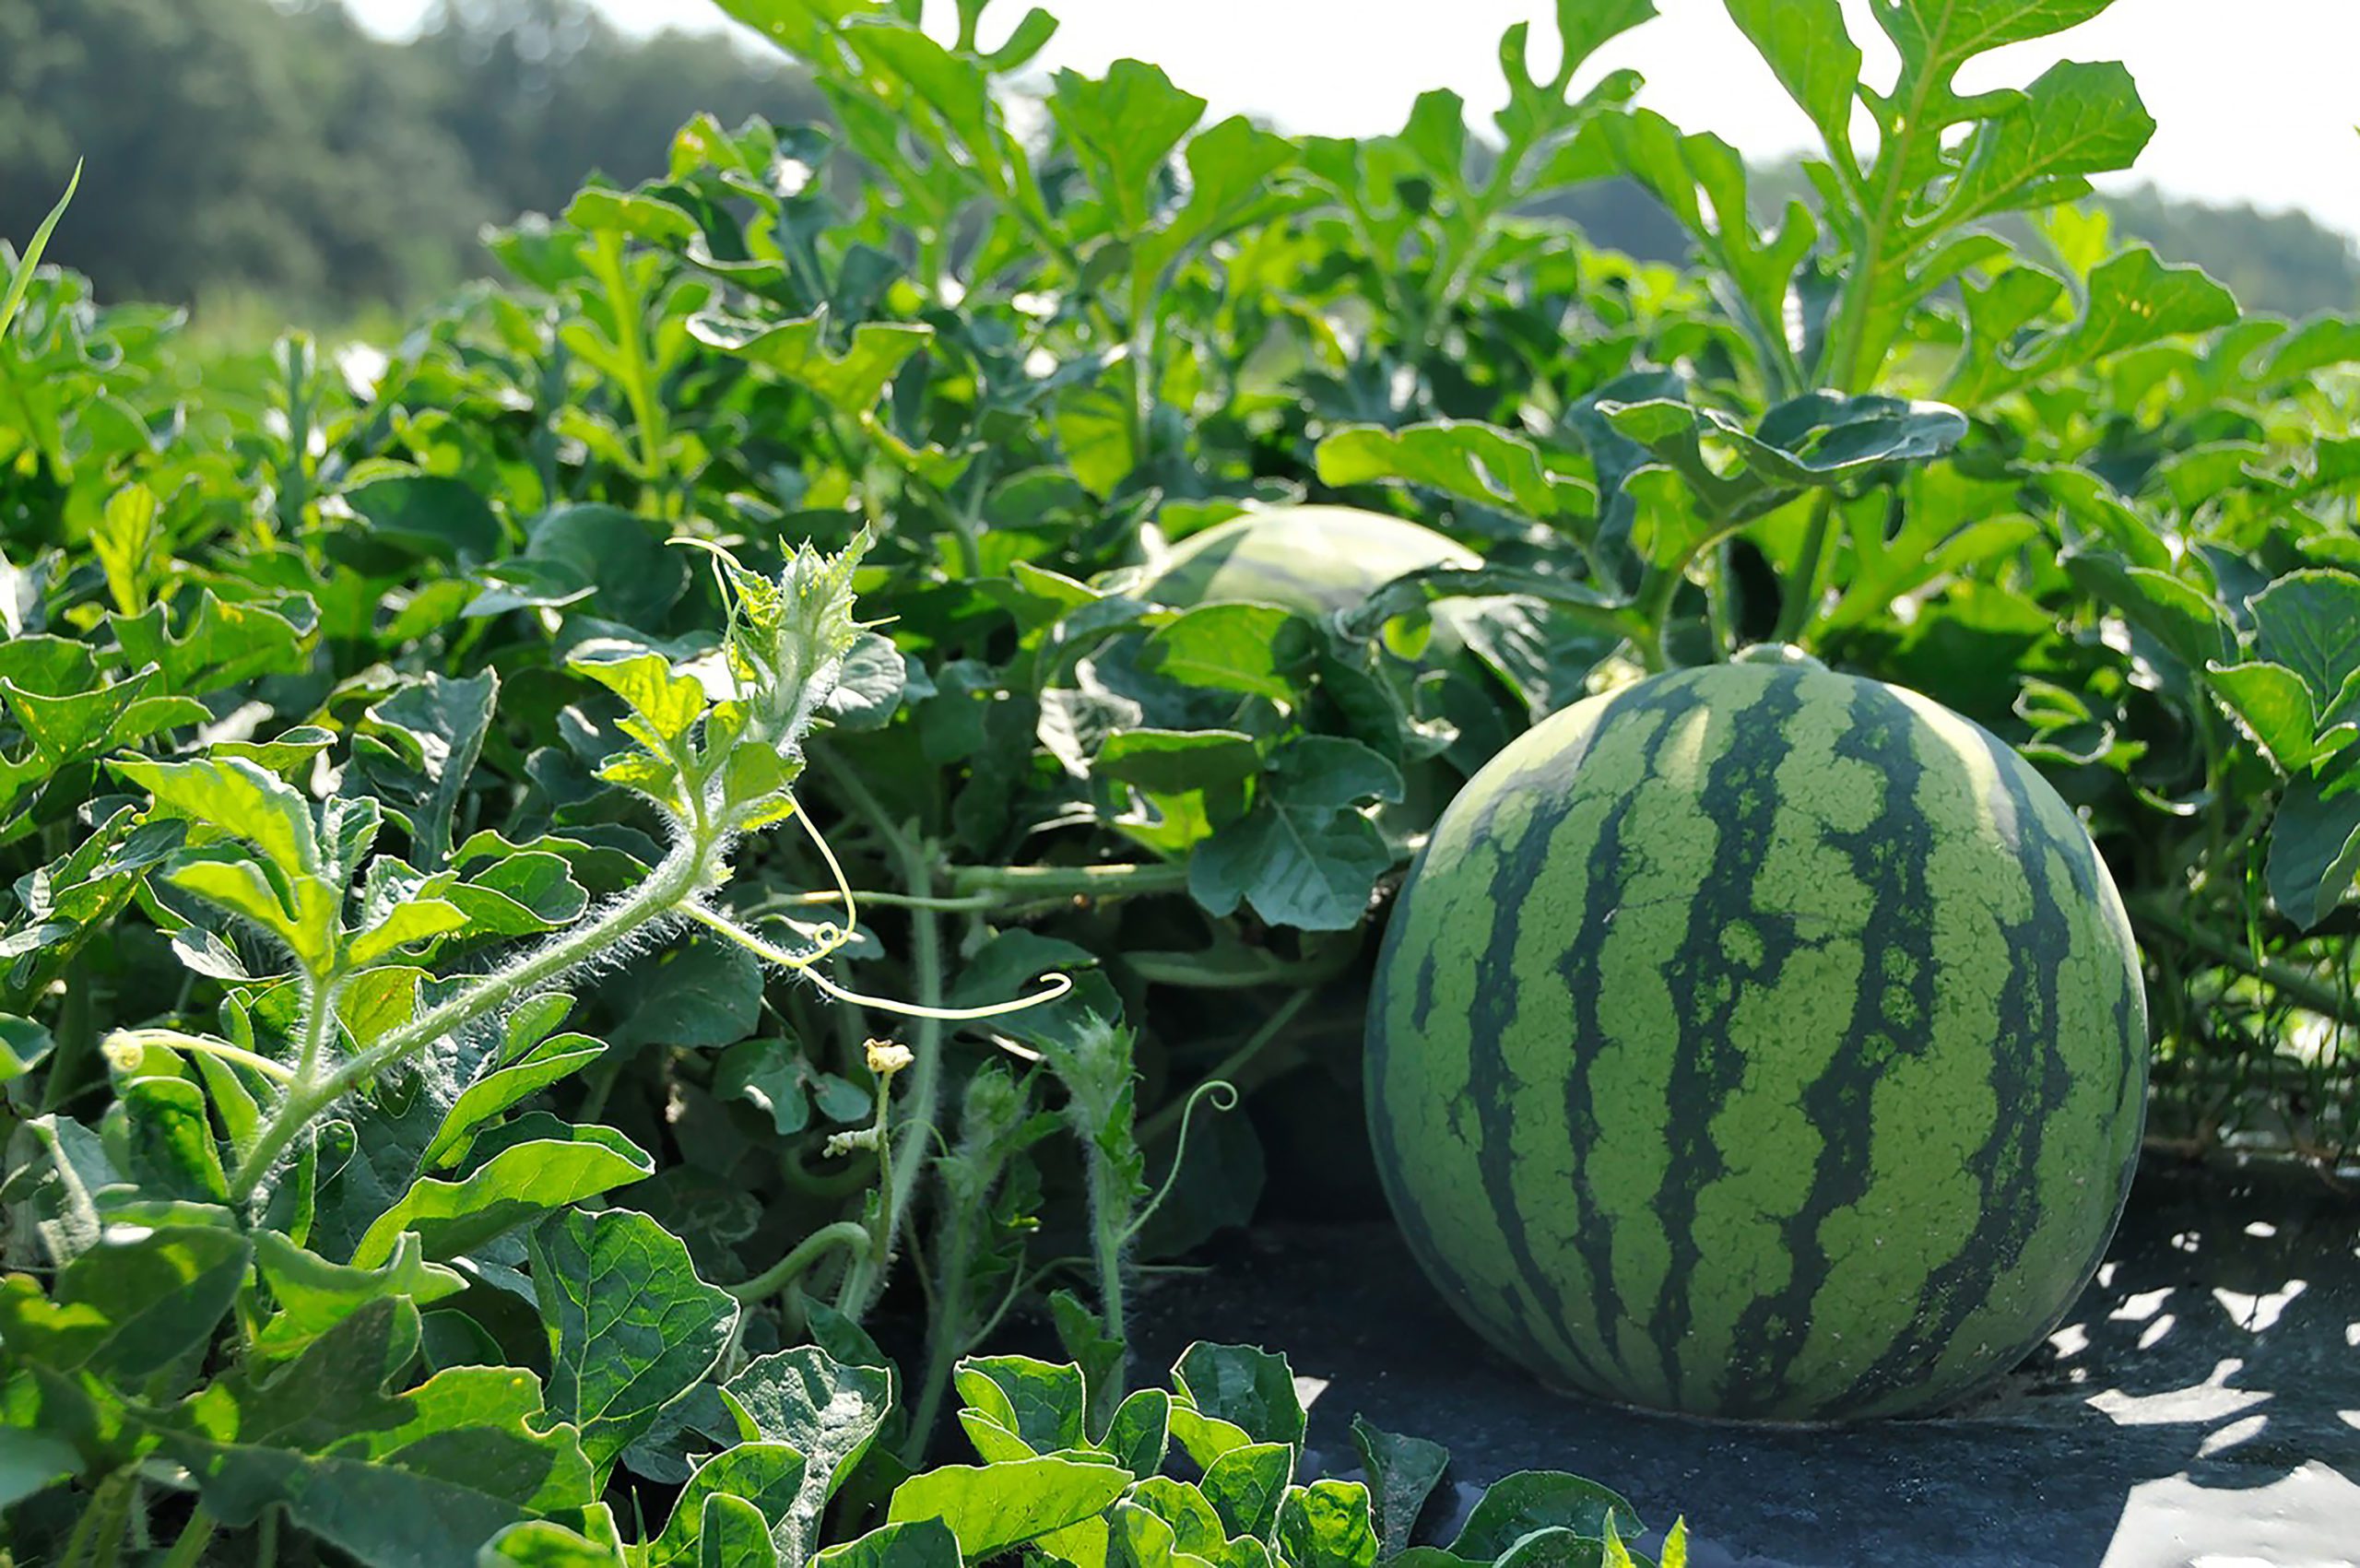 The Clemson University Watermelon Field Day is July 13 at the Edisto REC in Blackville, S.C.